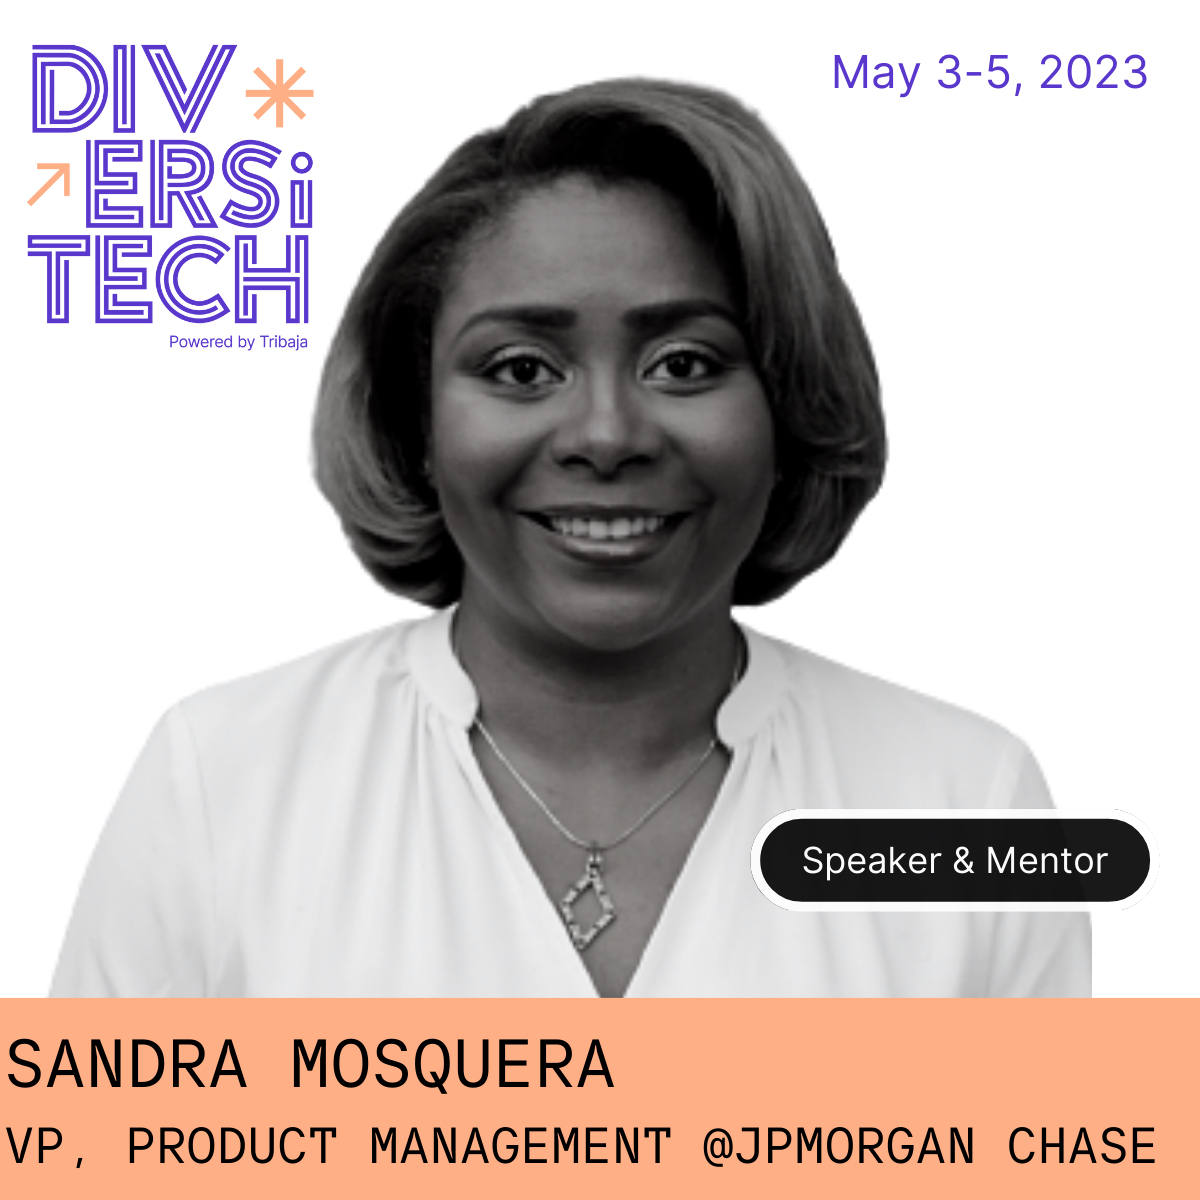 I'm excited to speak at Diversitech 2023 - A conference dedicated to exploring the intersection of technology and culture. @Join_Tribaja 
REGISTRATION: lnkd.in/eNbwN-AC
Join us to learn, connect, and grow! #TechCulture #DiversityandInclusion #DiversitechFest #diversitech